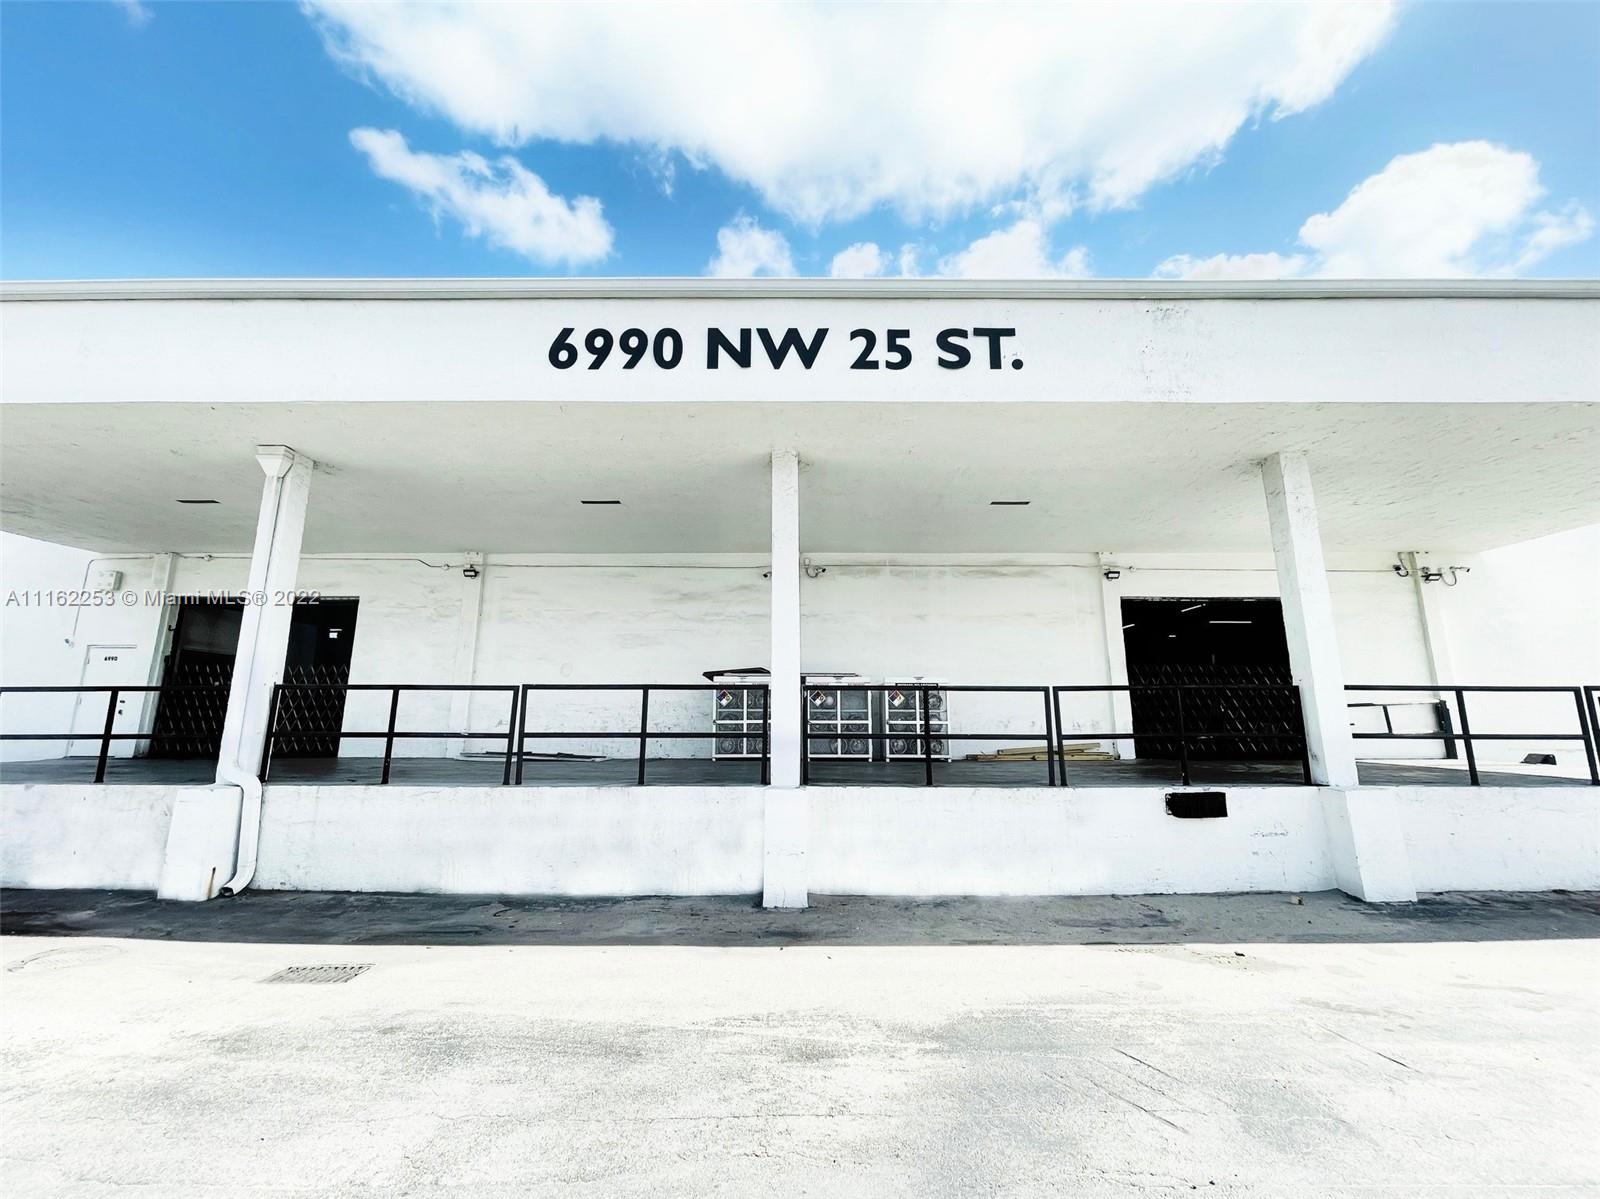 Prime location, ready for immediate occupancy. Industrial warehouse on NW 25th street next to MIA WEST GATE. 50,197 SF warehouse including 5,500SF of remodeled office space with wood tile and 2,700SF under AC in warehouse. 23' ceilings, concrete floors, and private parking in front of building with 49 spaces, additional parking on west side of building with 10 spaces. 20,000 +/- SF available